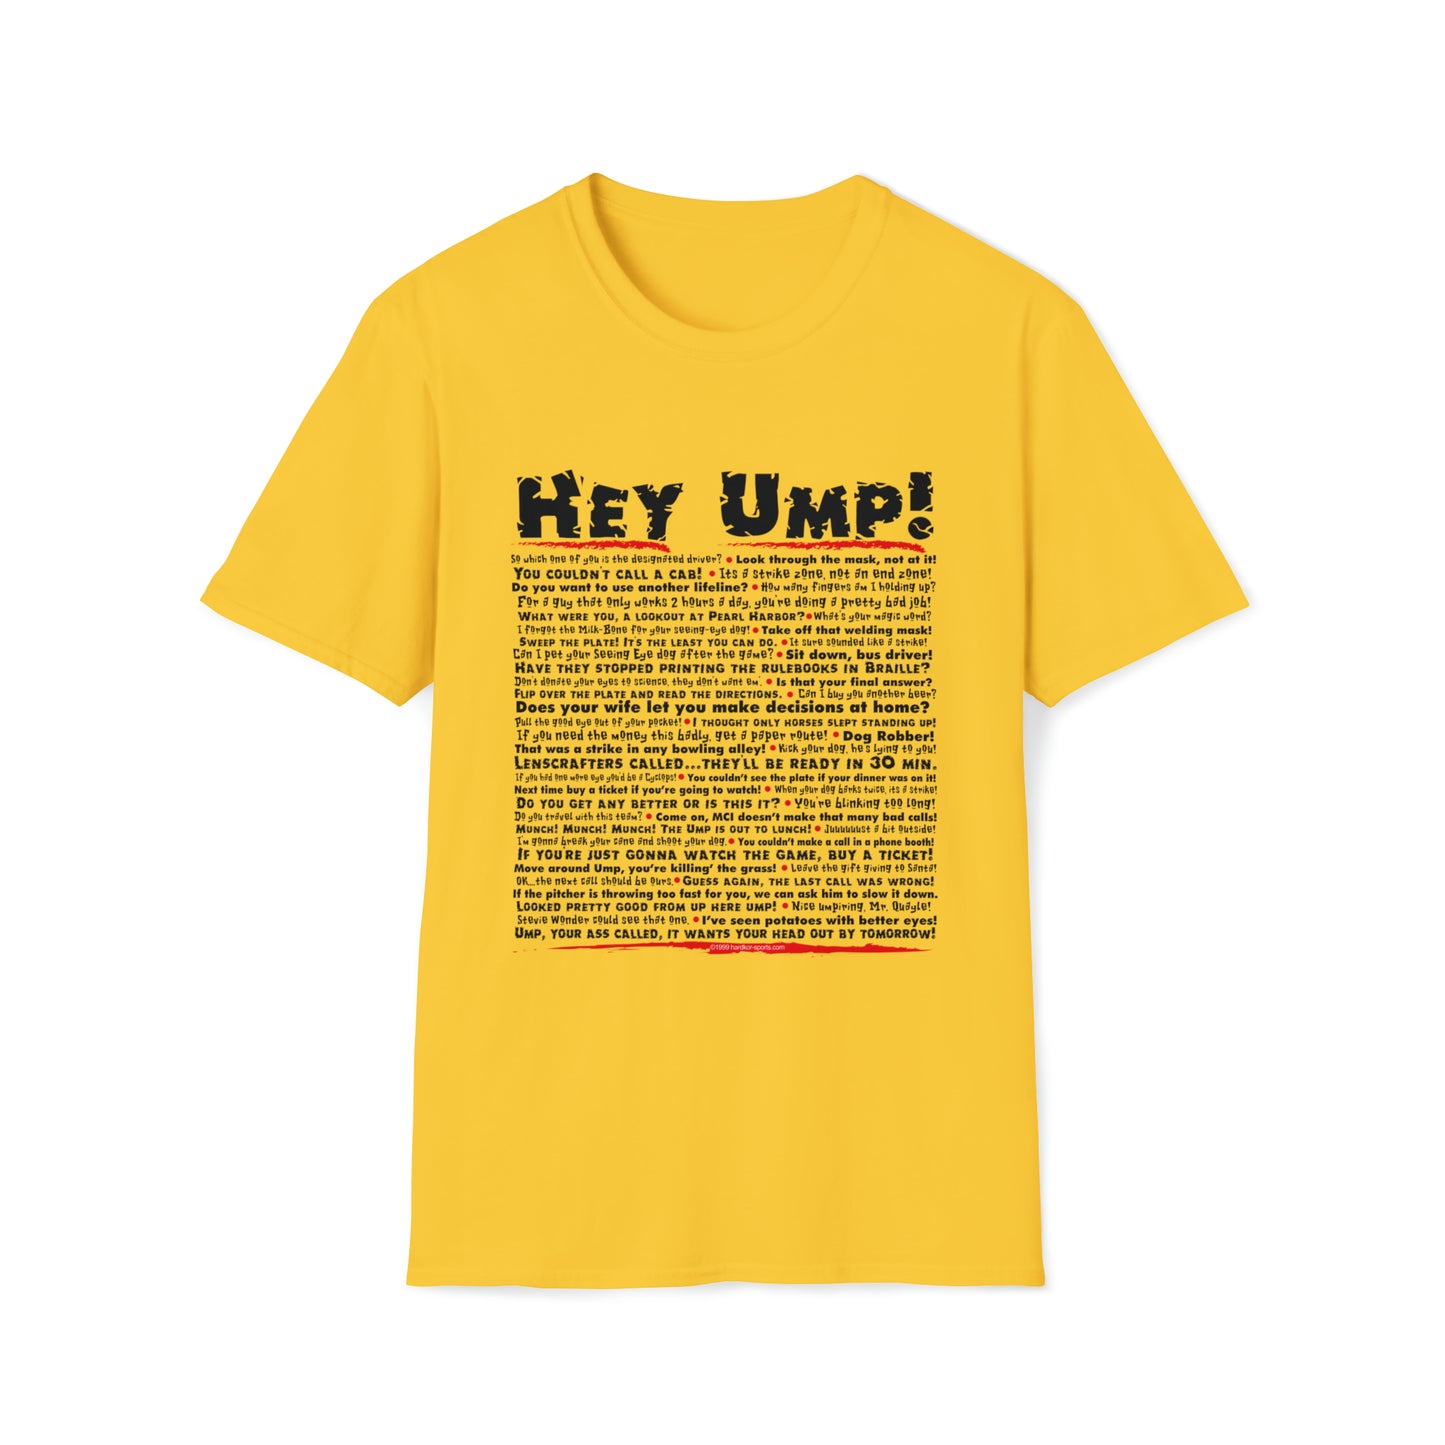 Hey Ump Funny Baseball T-Shirt, Humorous Insults and Jabs to Say to the Ump. White, Grey, Youth, Adult Umpire Humor Tee Shirt